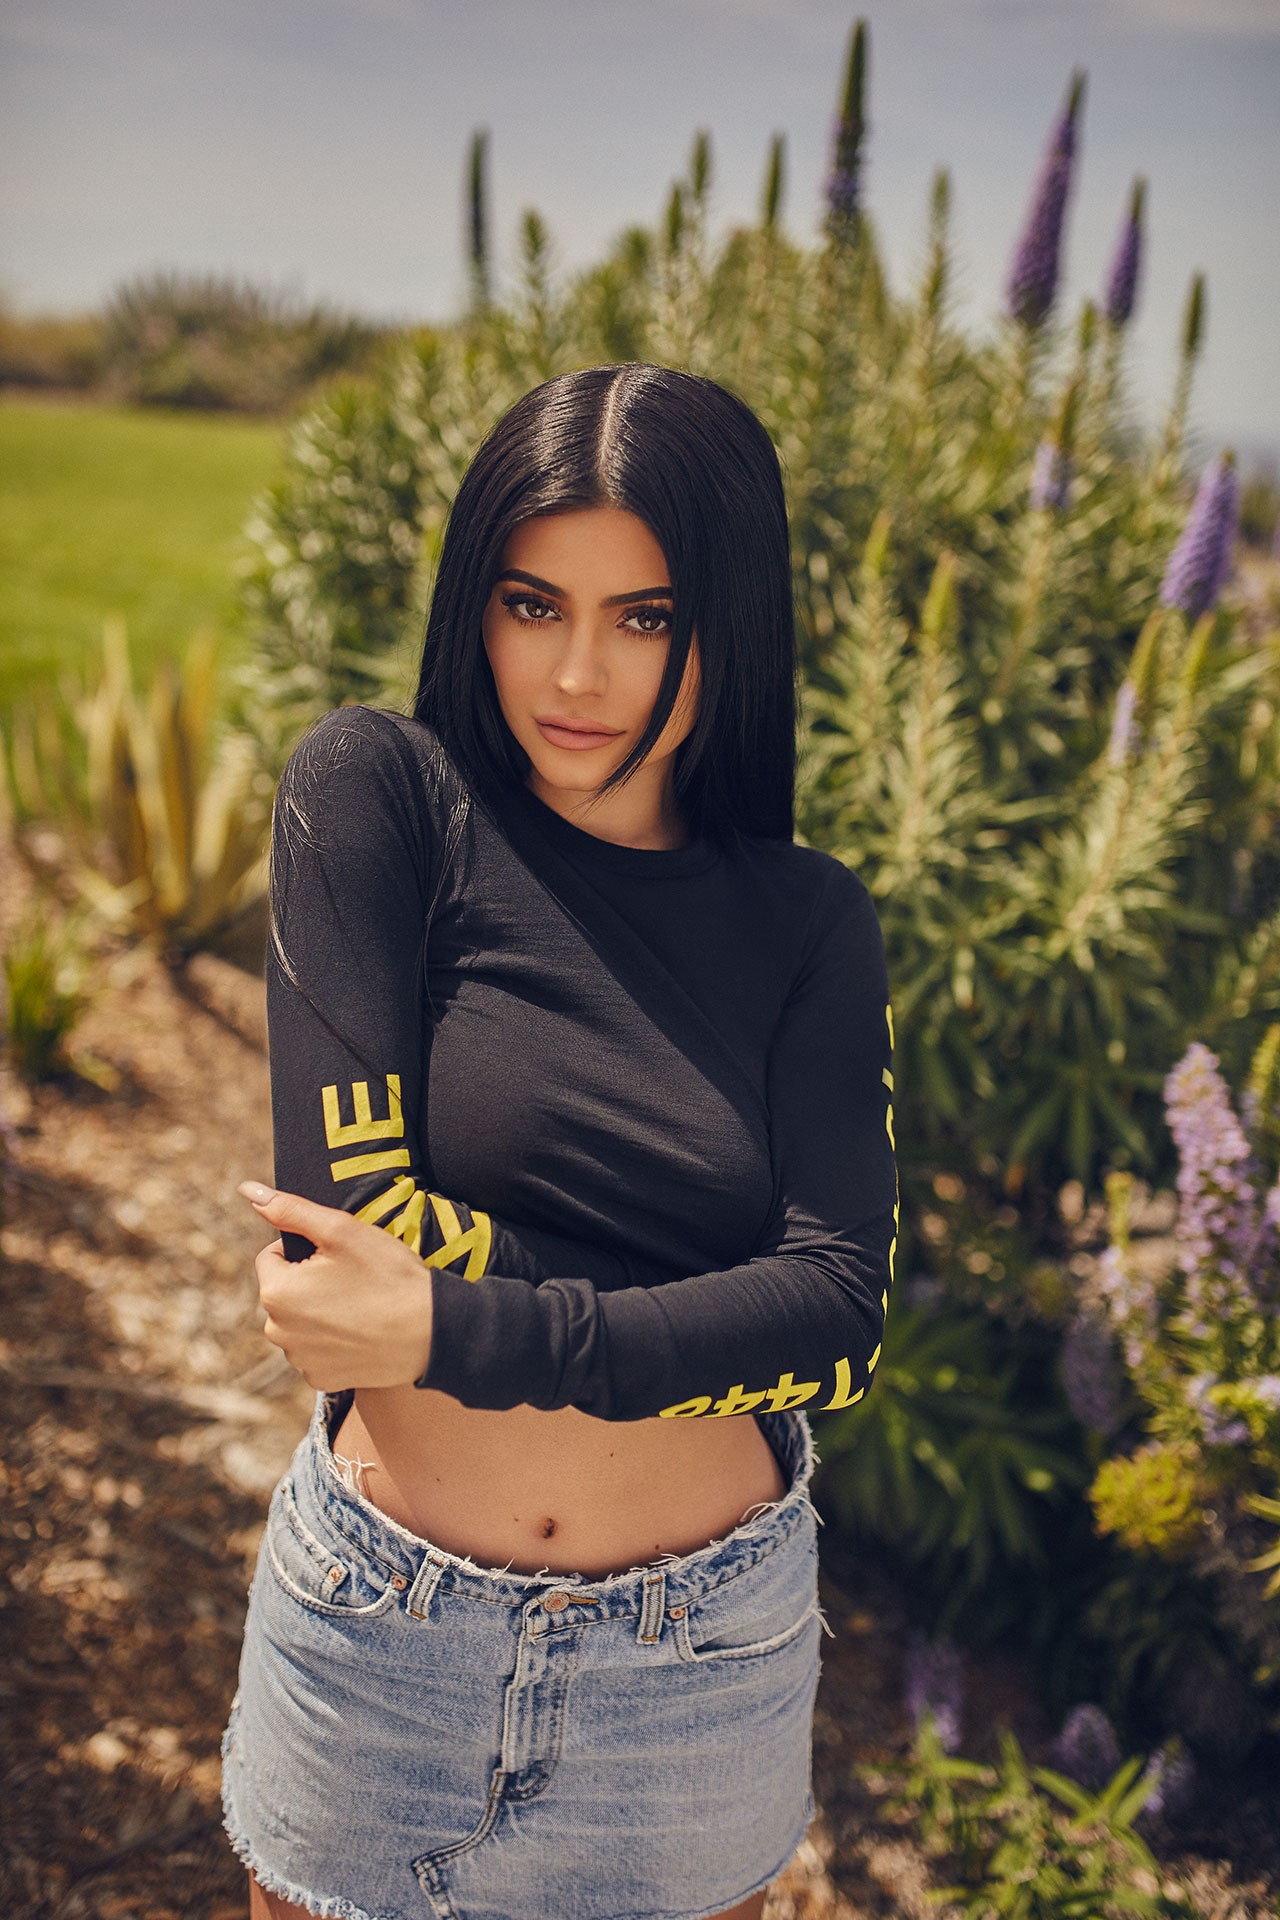 Kylie Jenner Cosmetics Campaign 2017 Wallpapers